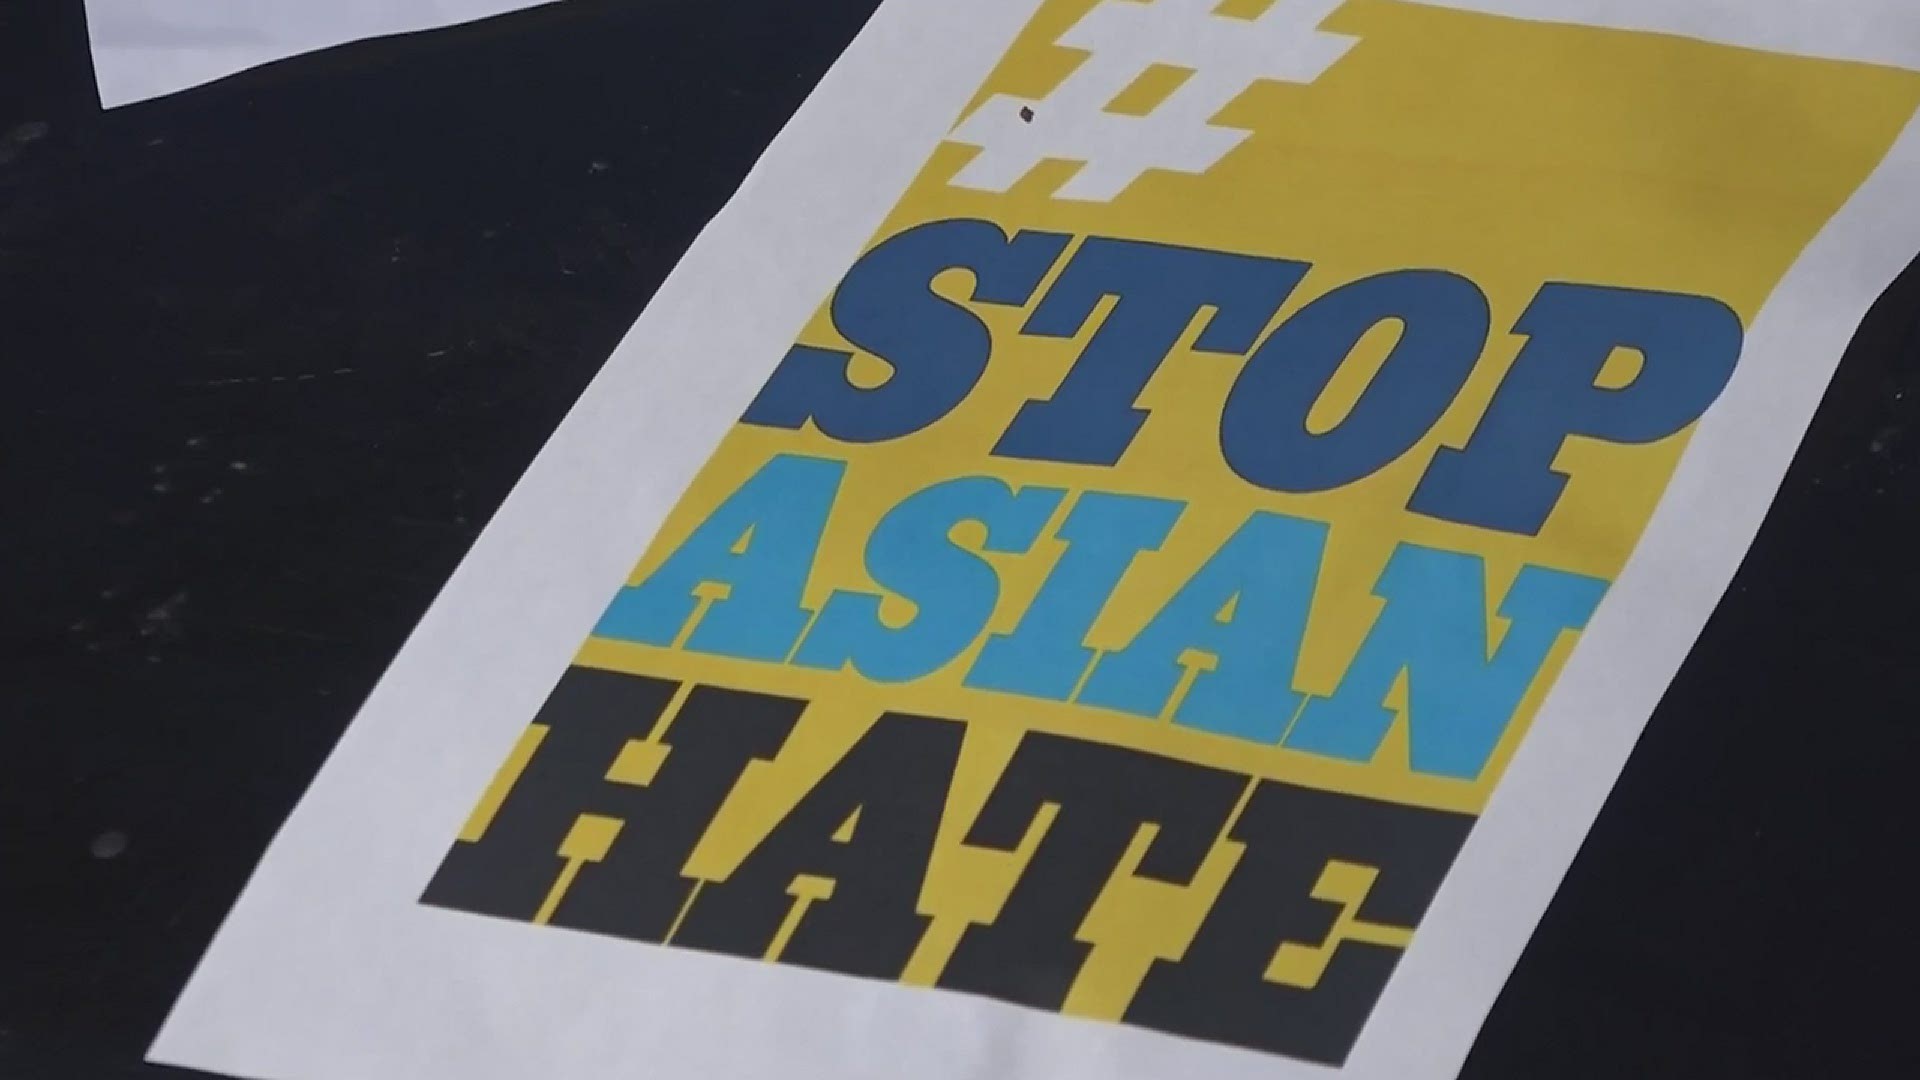 A national Unity Against Hate rally will be held on Saturday, May 15. At least 16 cities, including Sacramento, are holding a march or rally at the same time.